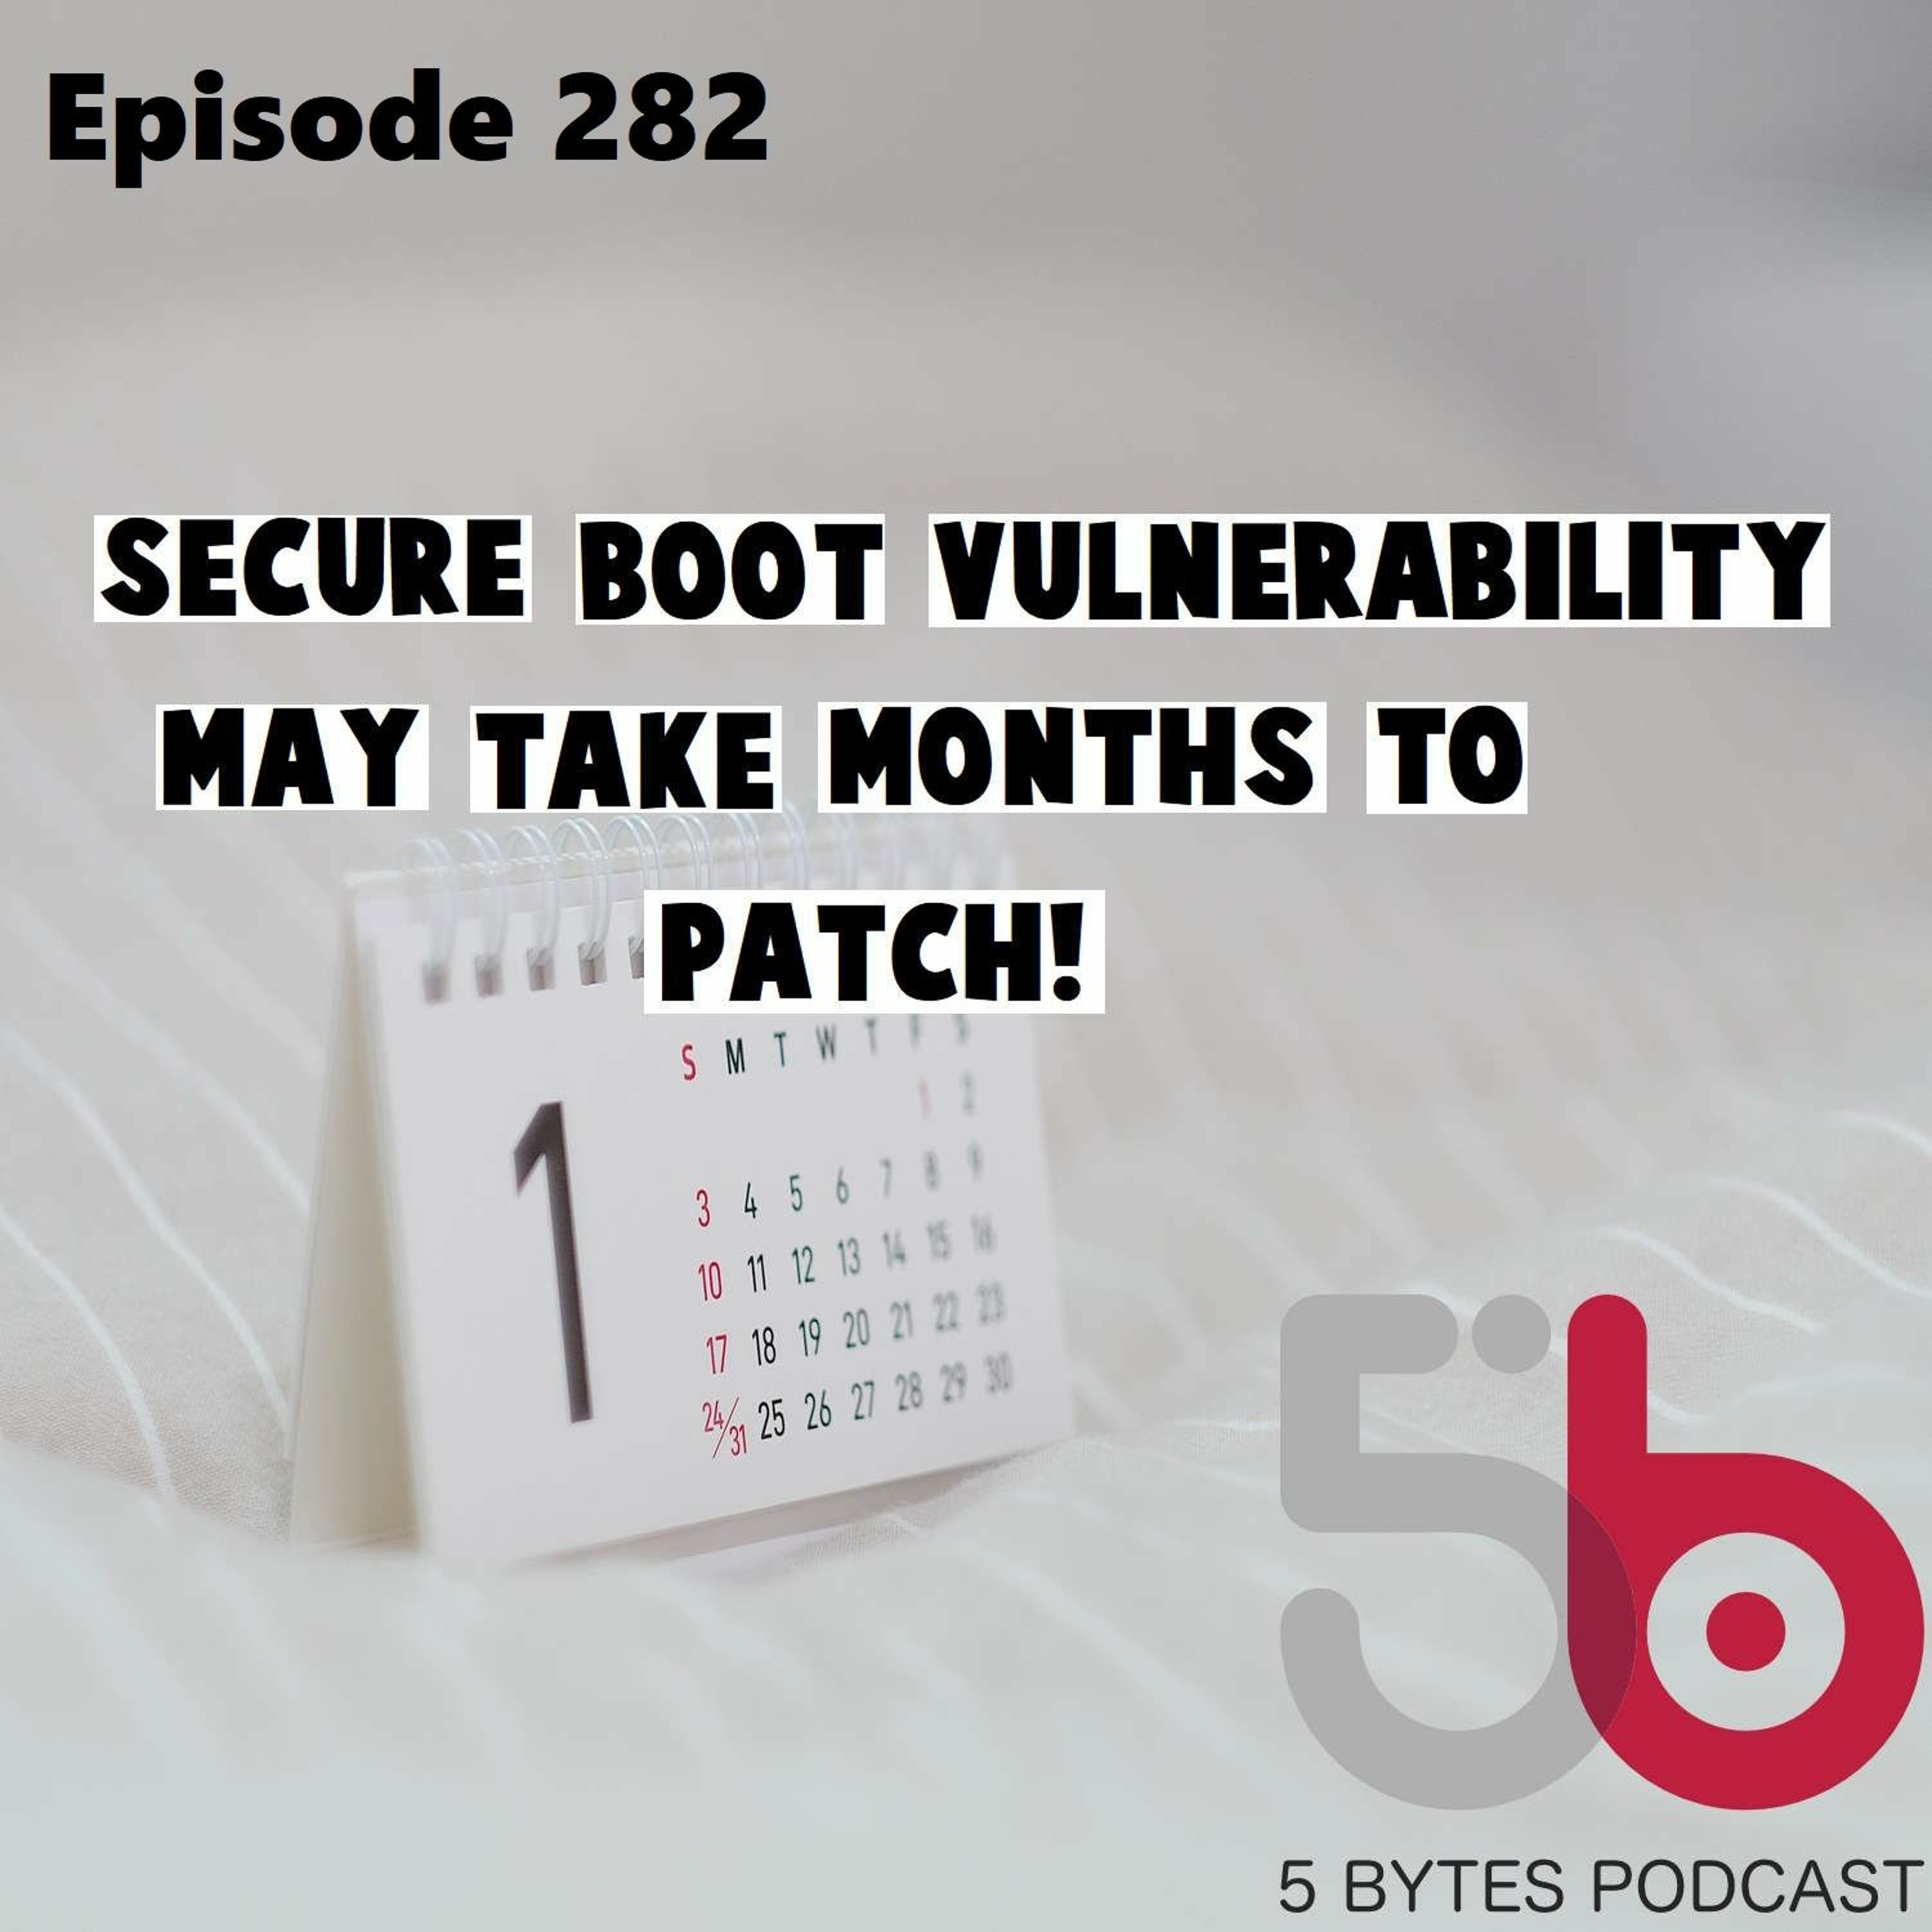 Secure Boot Vulnerability May Takes Months to Patch! KeePass Password Leak!